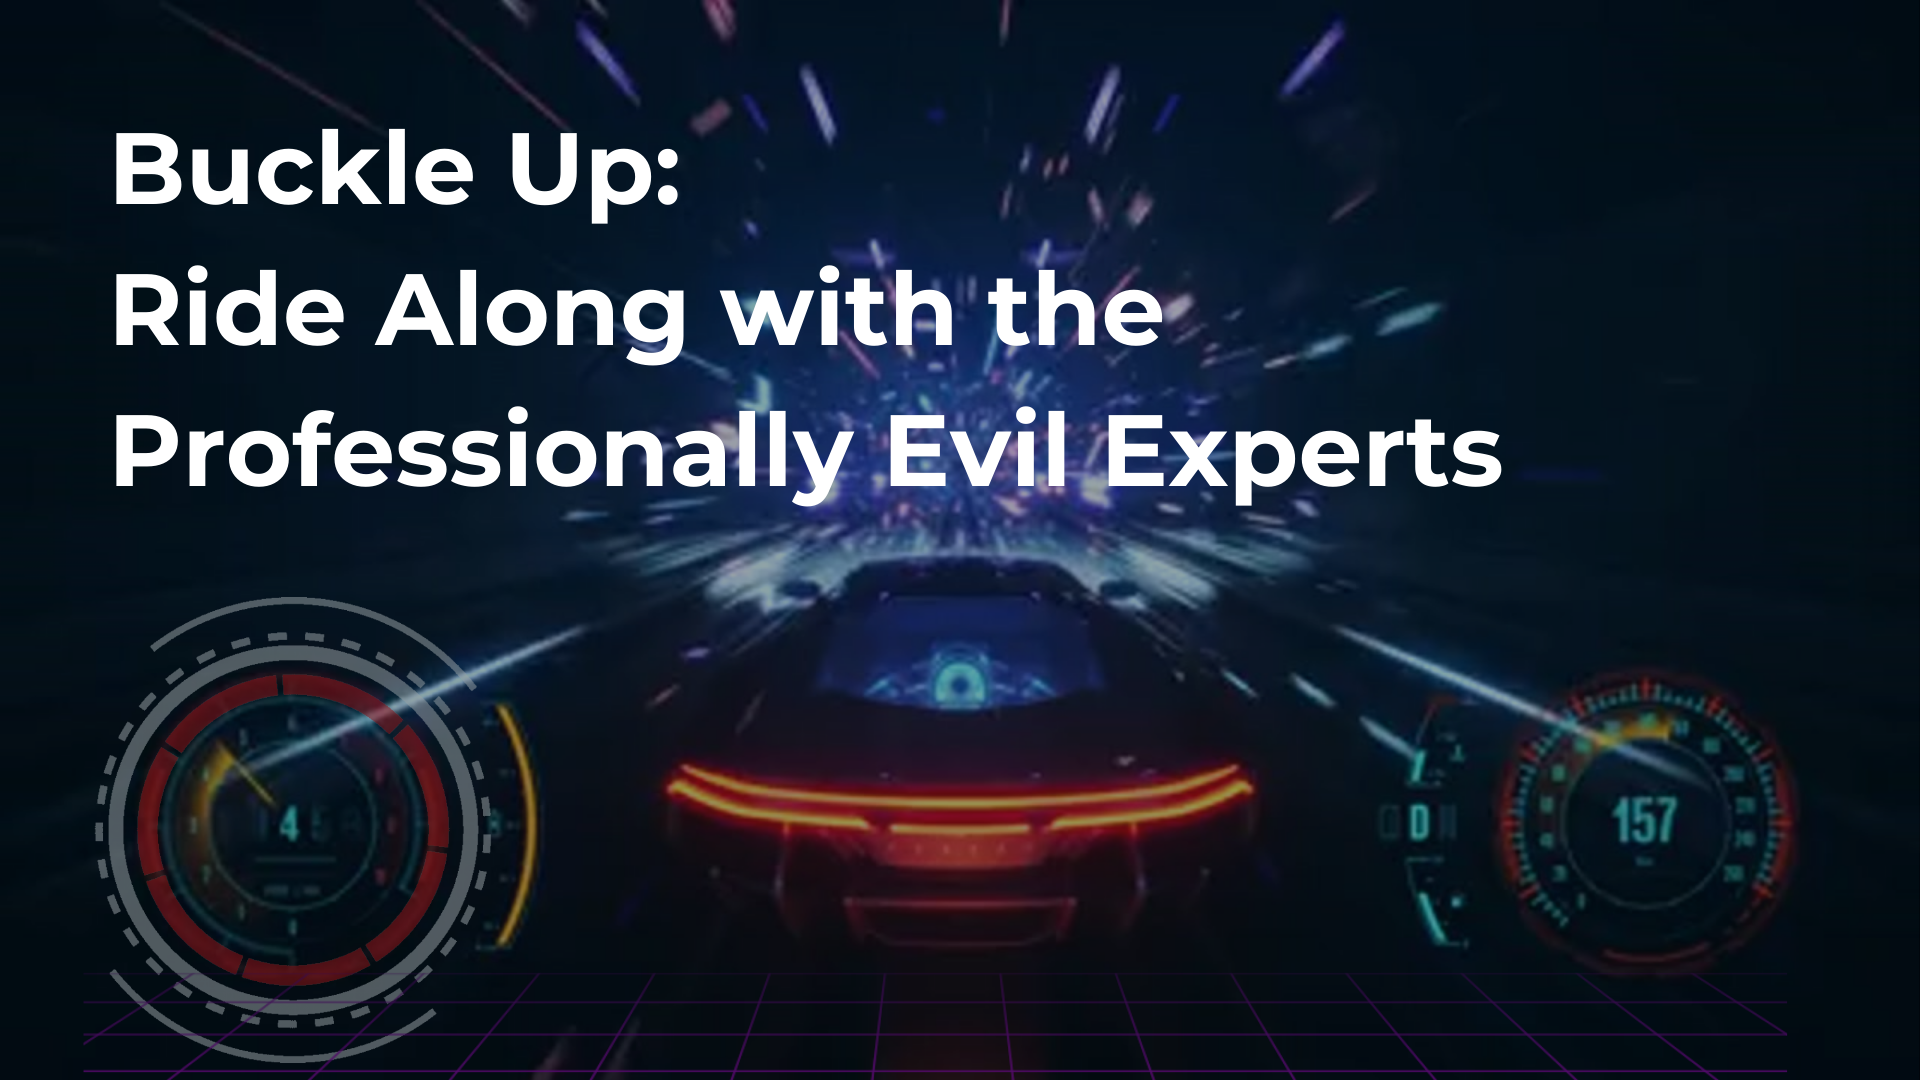 Buckle Up: Ride Along with the Professionally Evil Experts